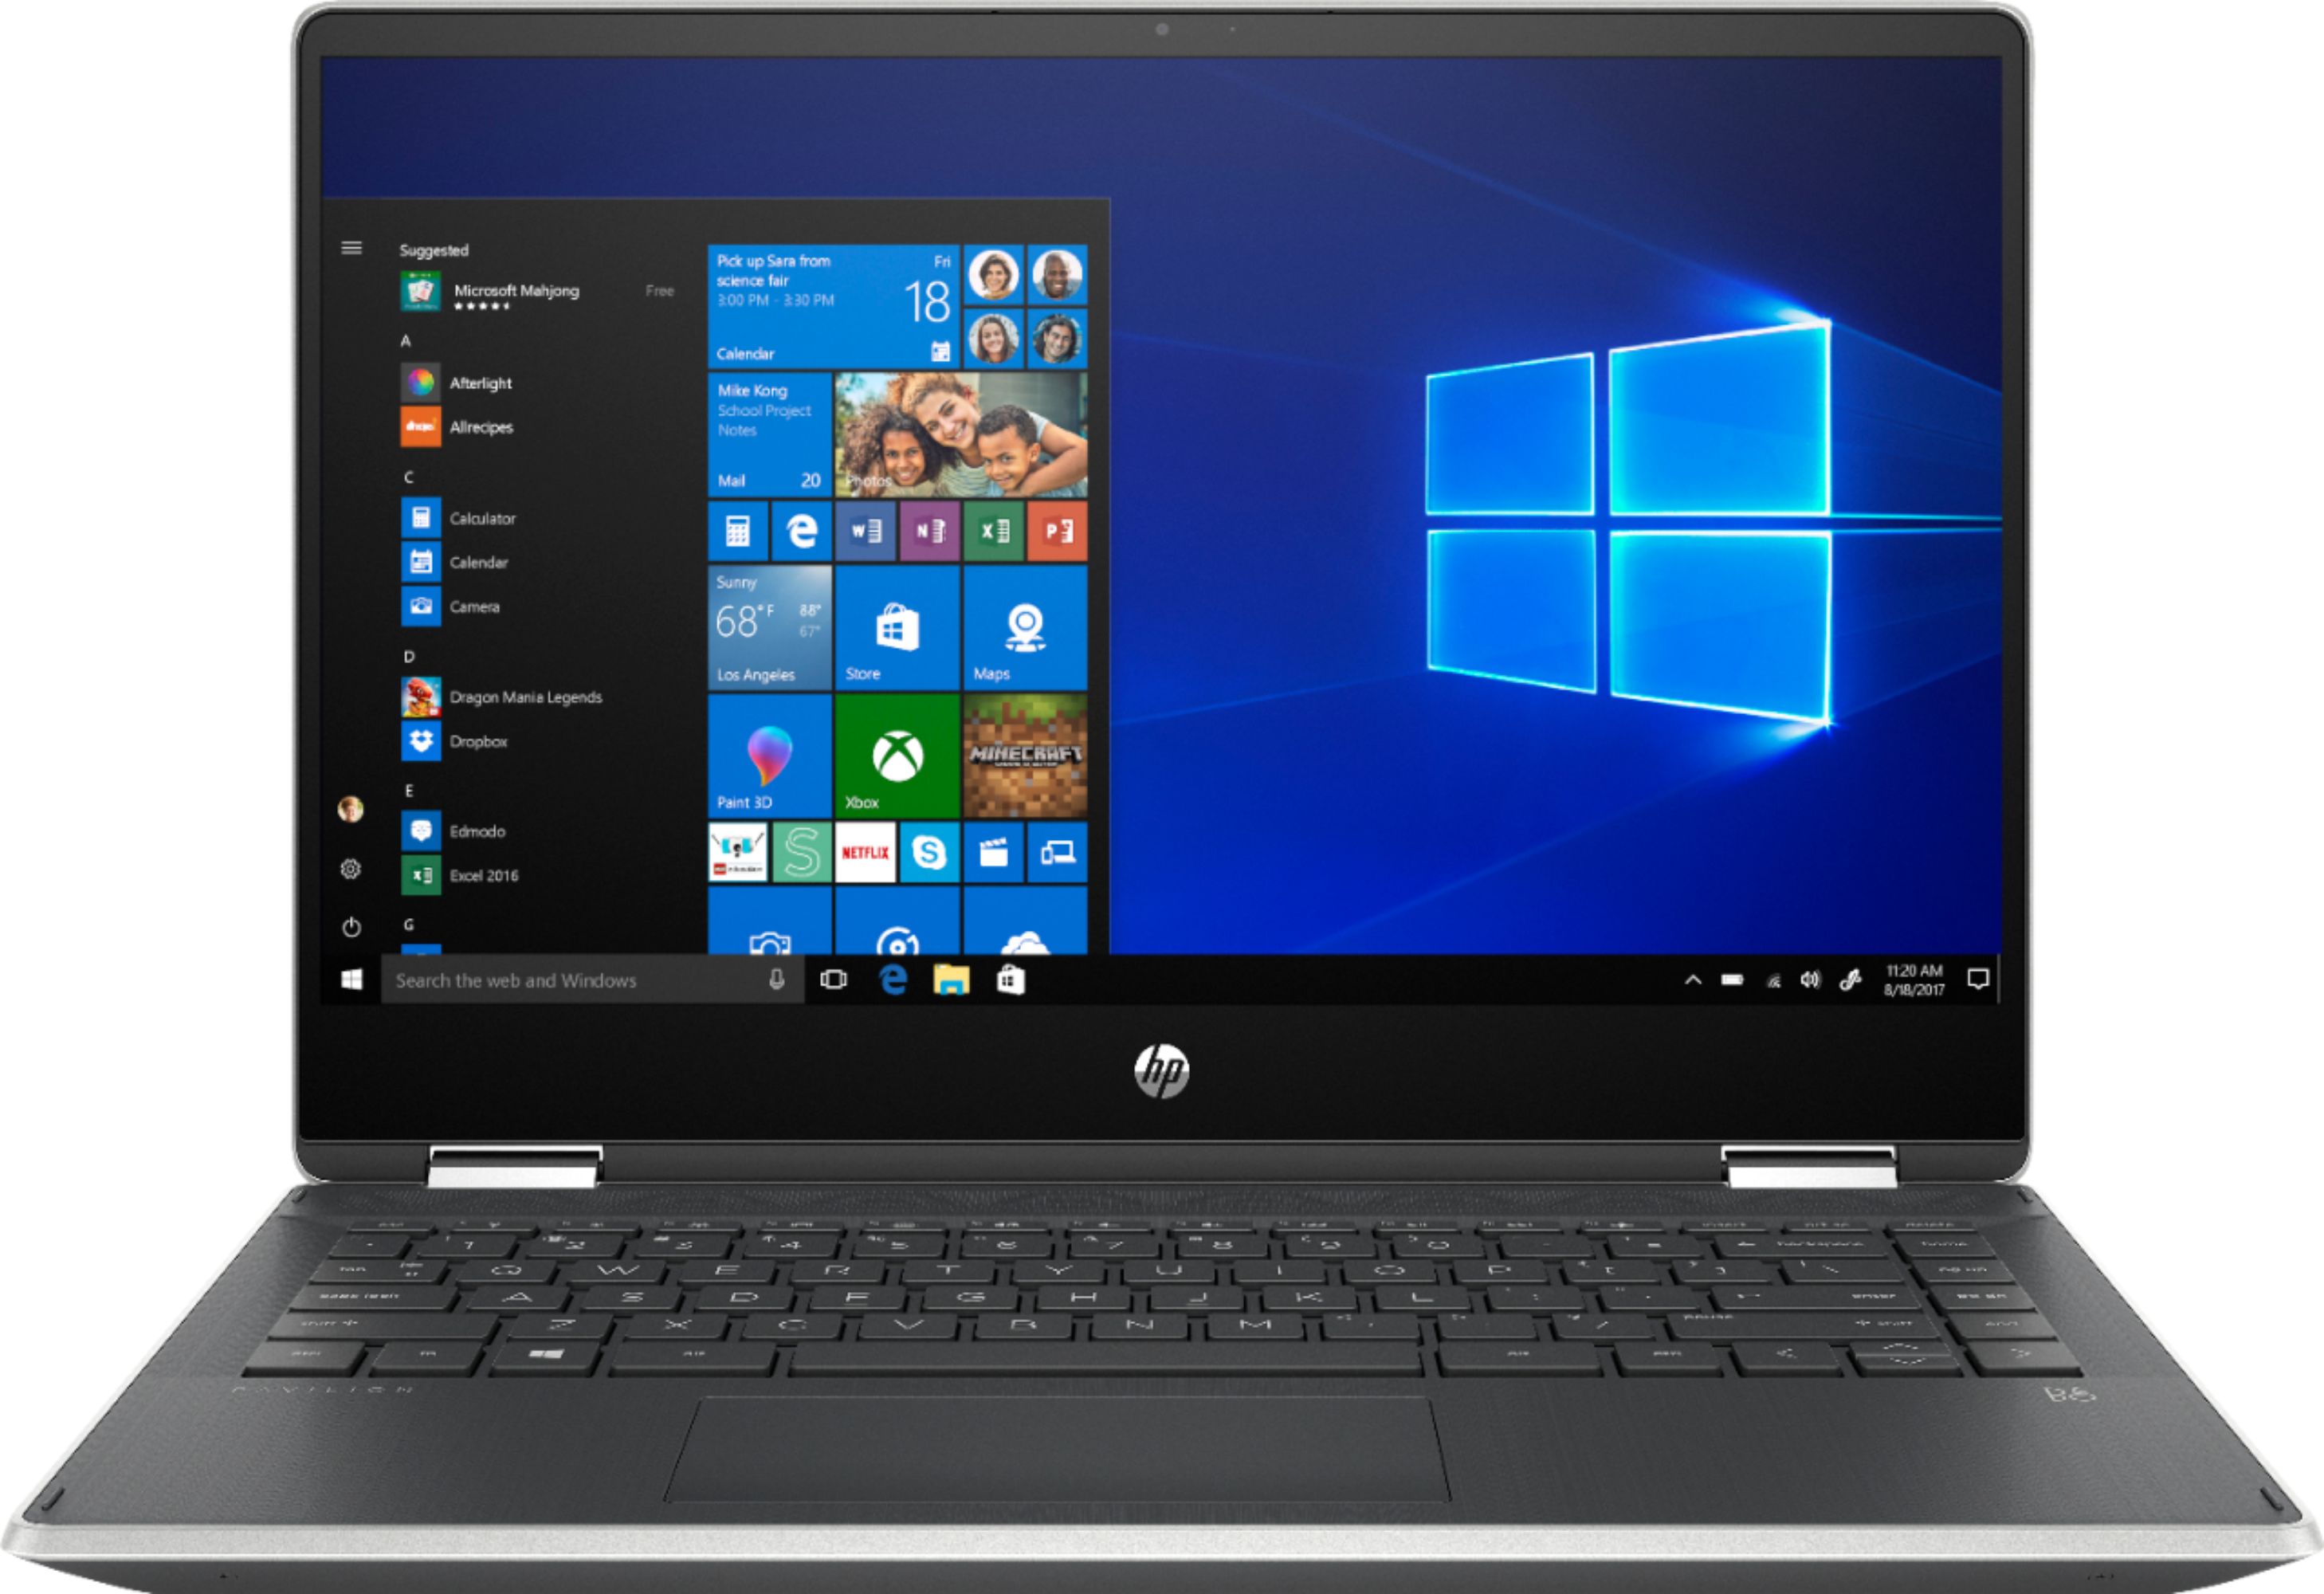 HP - Pavilion x360 2-in-1 14" Touch-Screen Laptop - Intel Core i3 - 8GB Memory - 128GB Solid State Drive